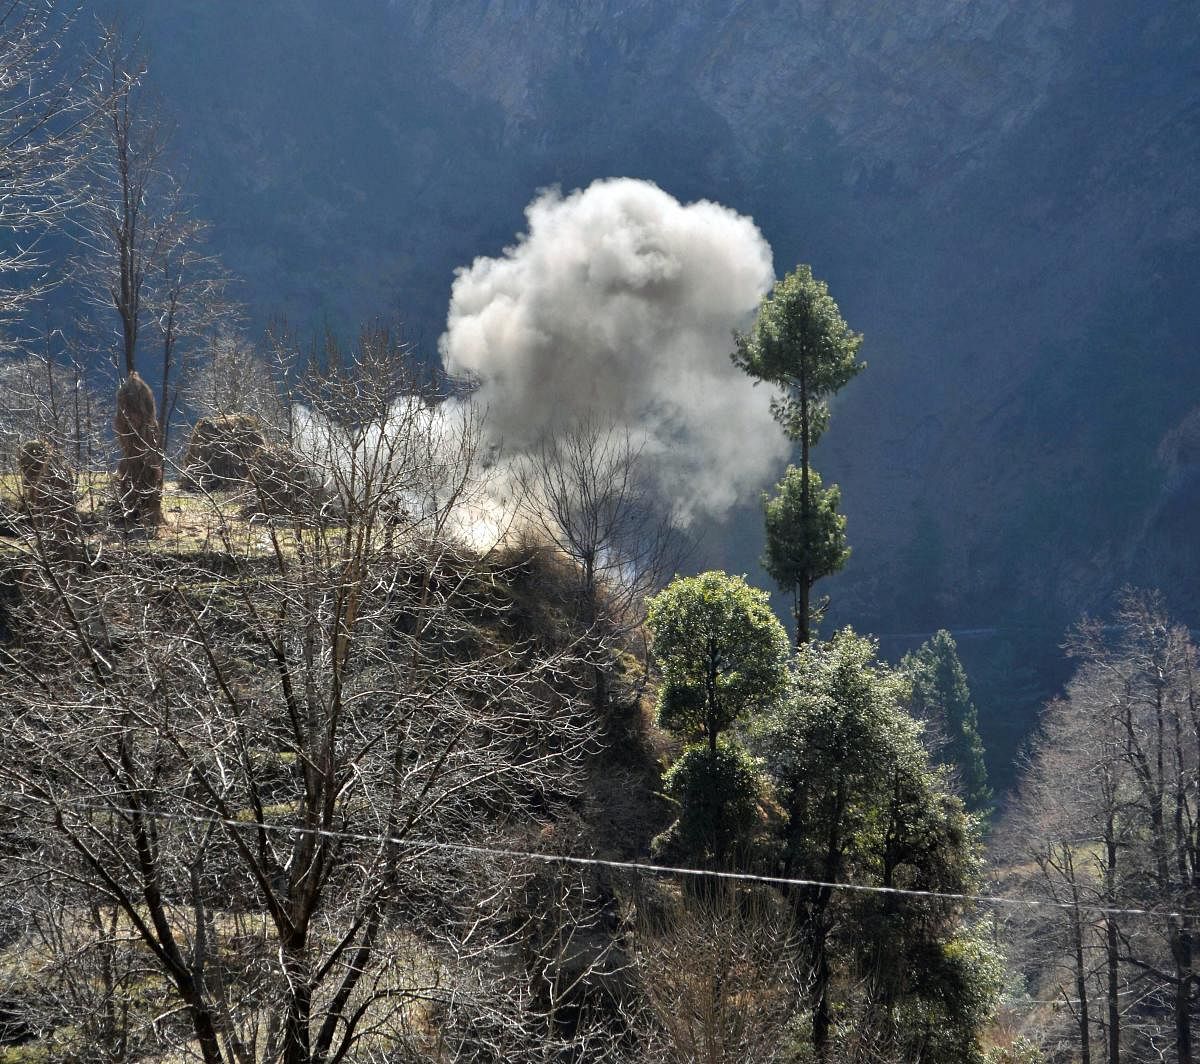 A soldier was killed in fresh ceasefire violation by Pakistan along the Line of Control (LoC) in Sunderbani sector of a sector of Rajouri district in Jammu and Kashmir on Tuesday. (PTI Image for Representation)